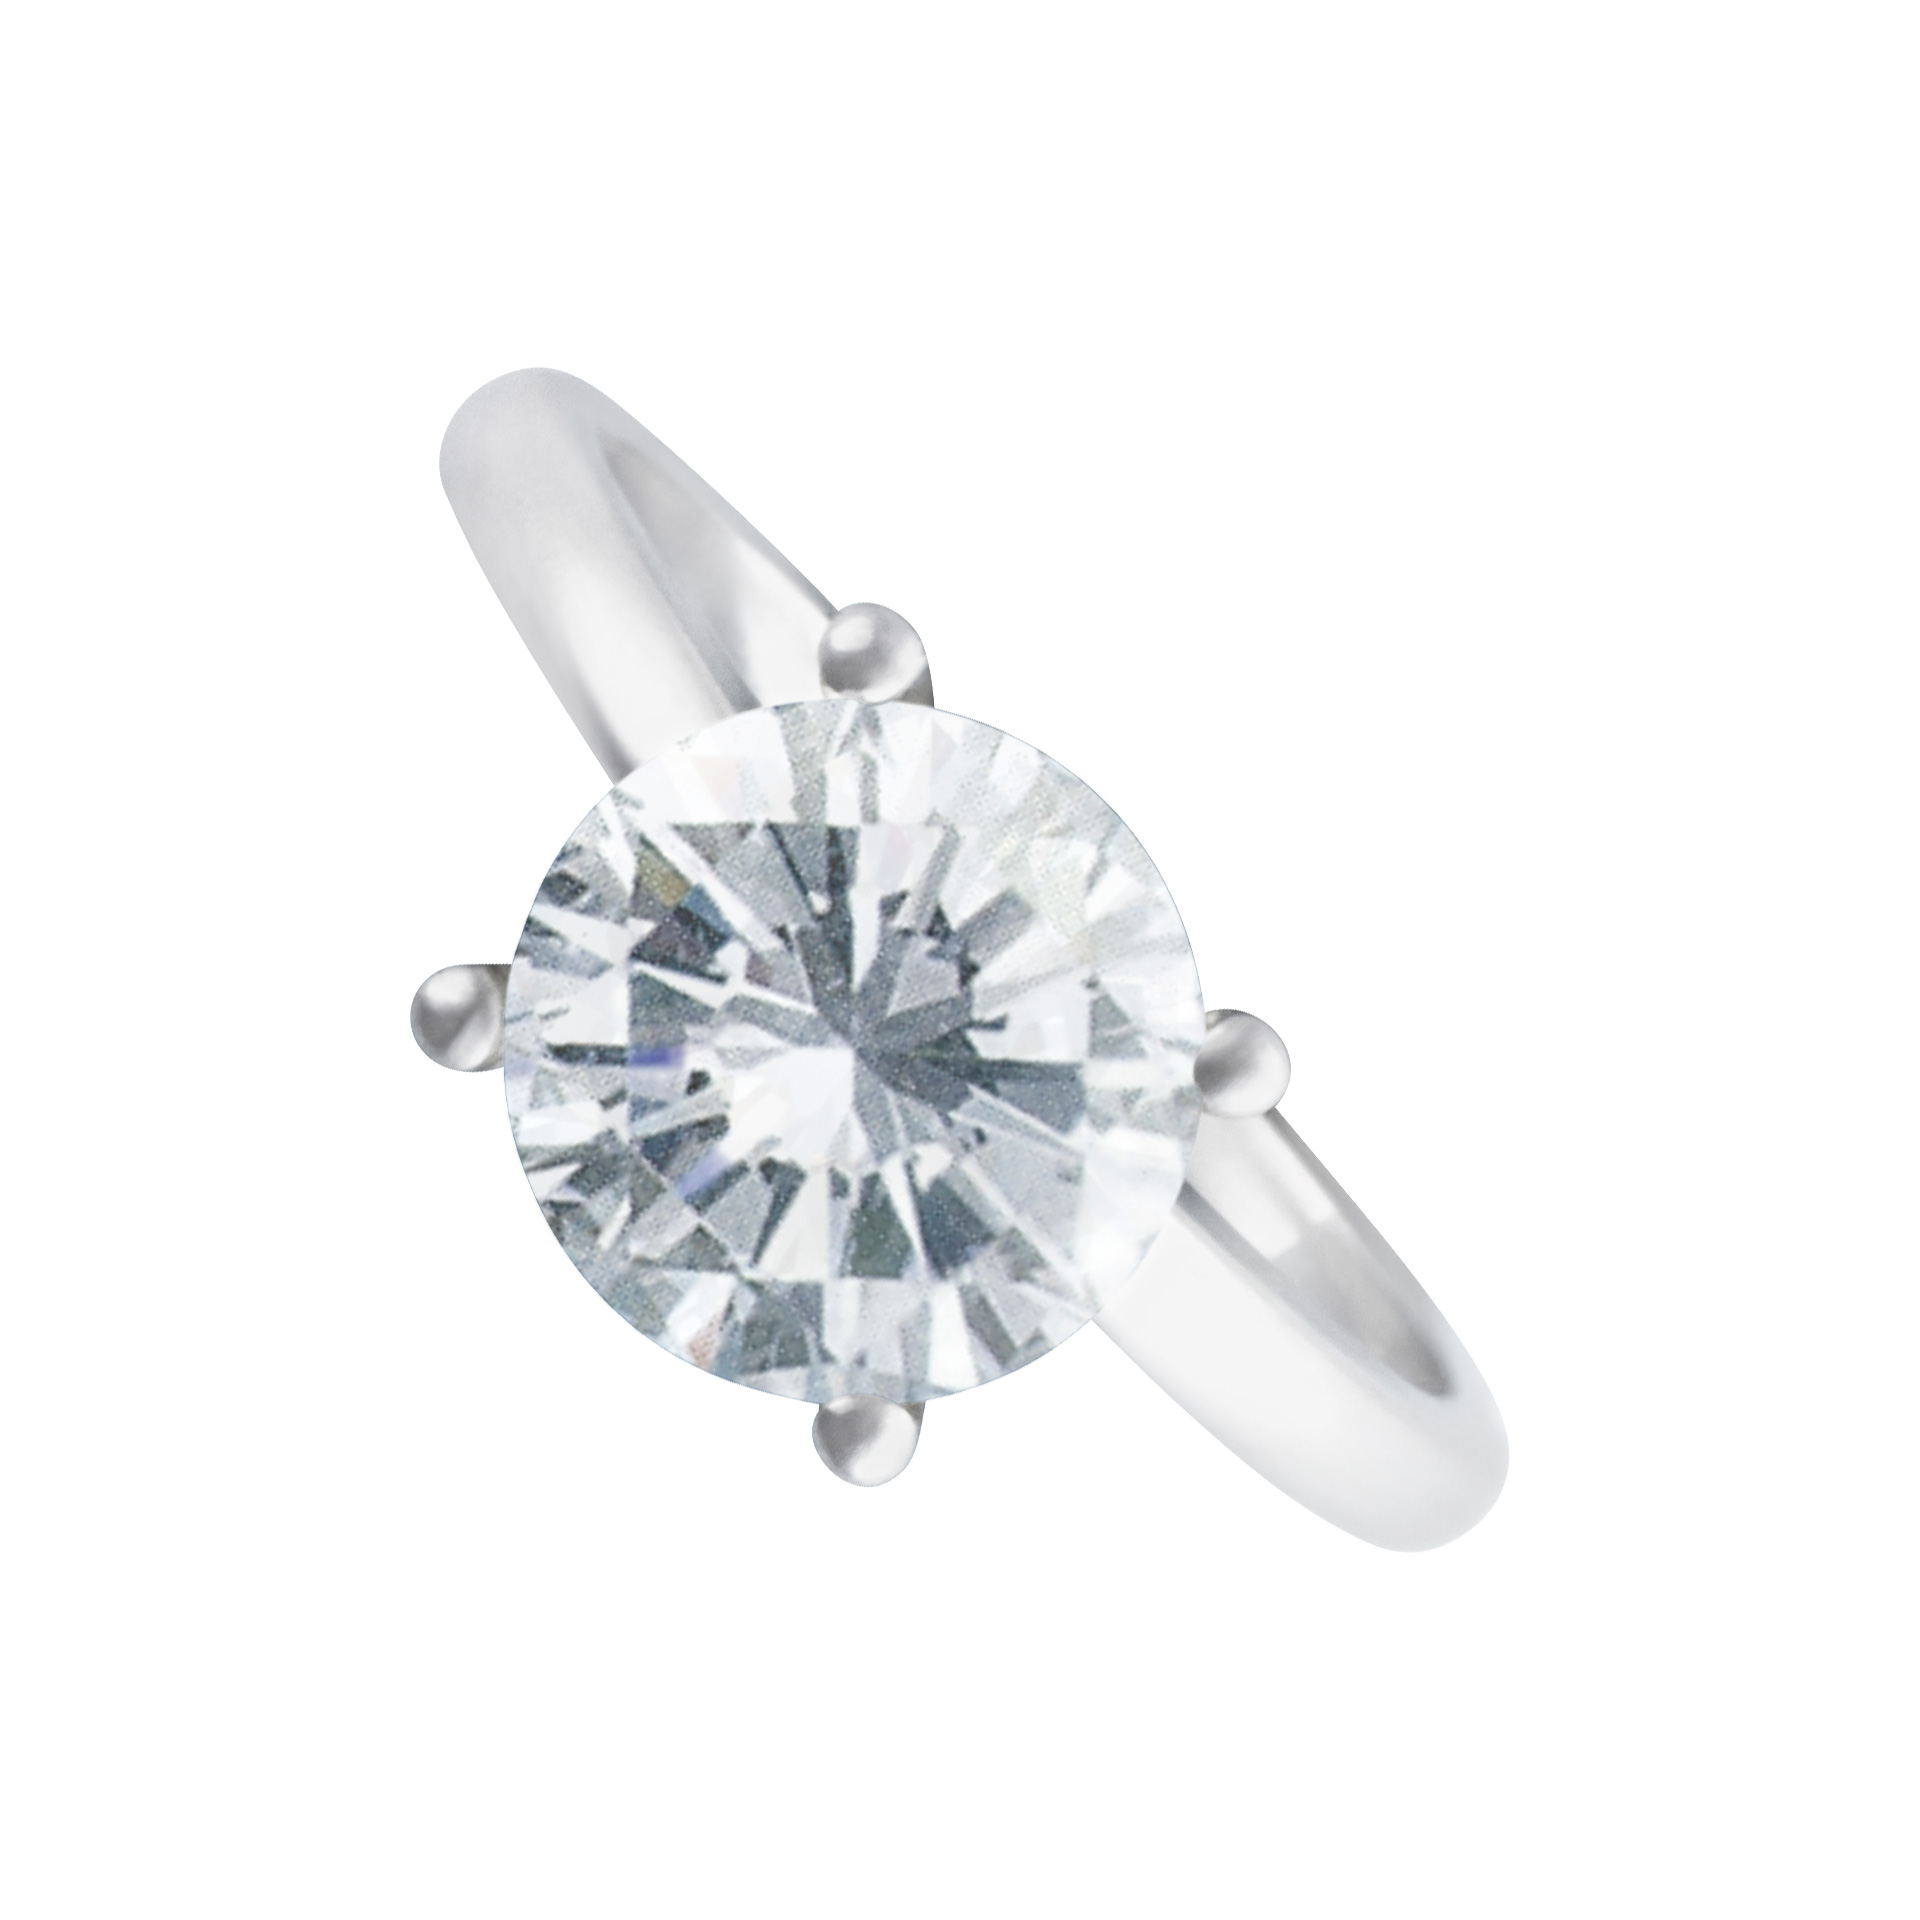 GIA Certified Round Diamond 1.50 Carats (N Color, VS2 Clarity)  ring.